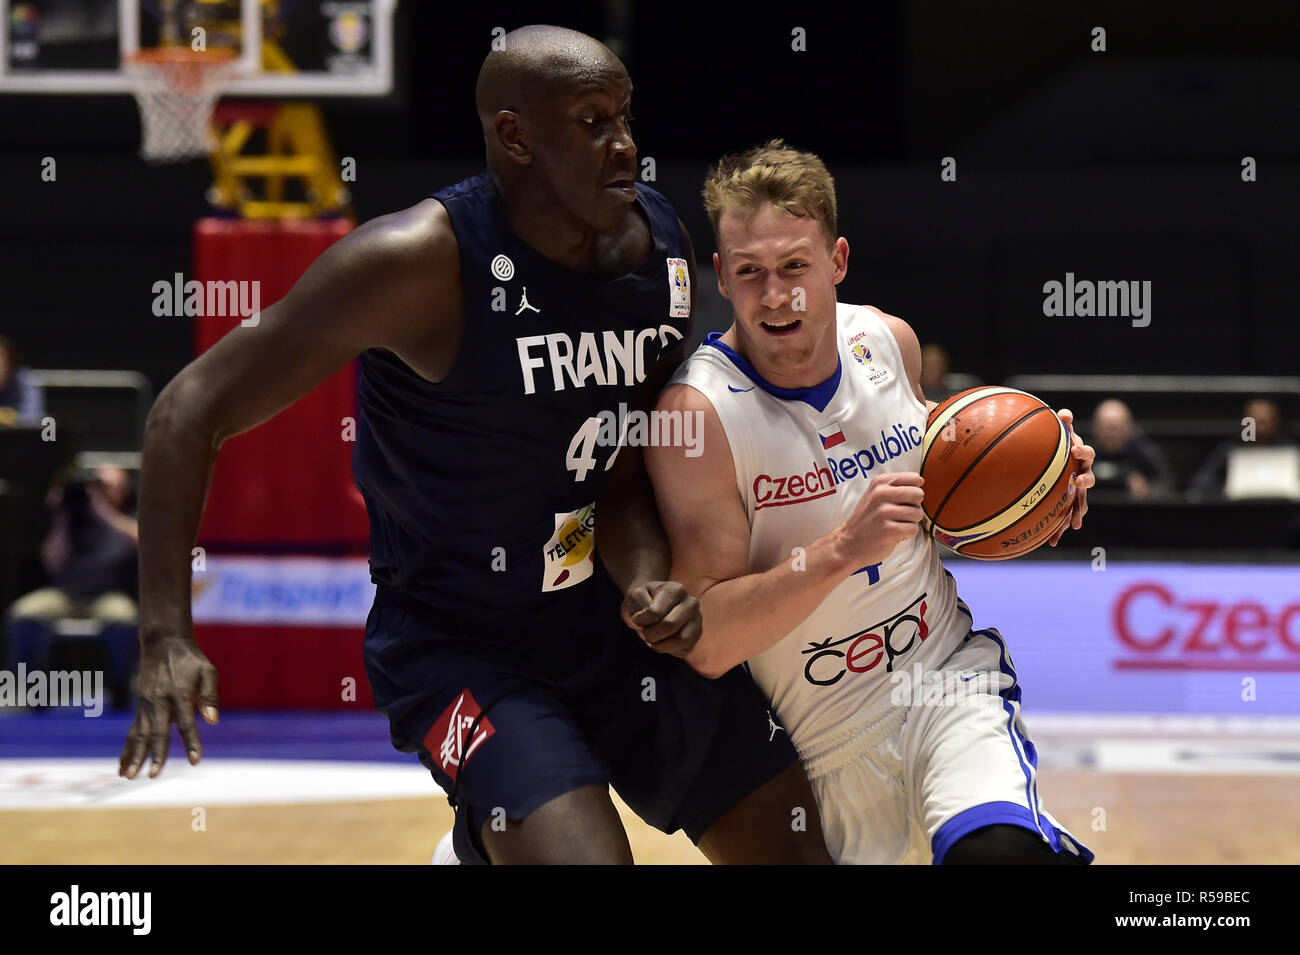 Ousmane Camara of France, left, and Tomas Vyoral of Czech Republic fight  for a ball during the qualification match for the Basketball World Cup 2019 Czech  Republic vs France in Pardubice, Czech